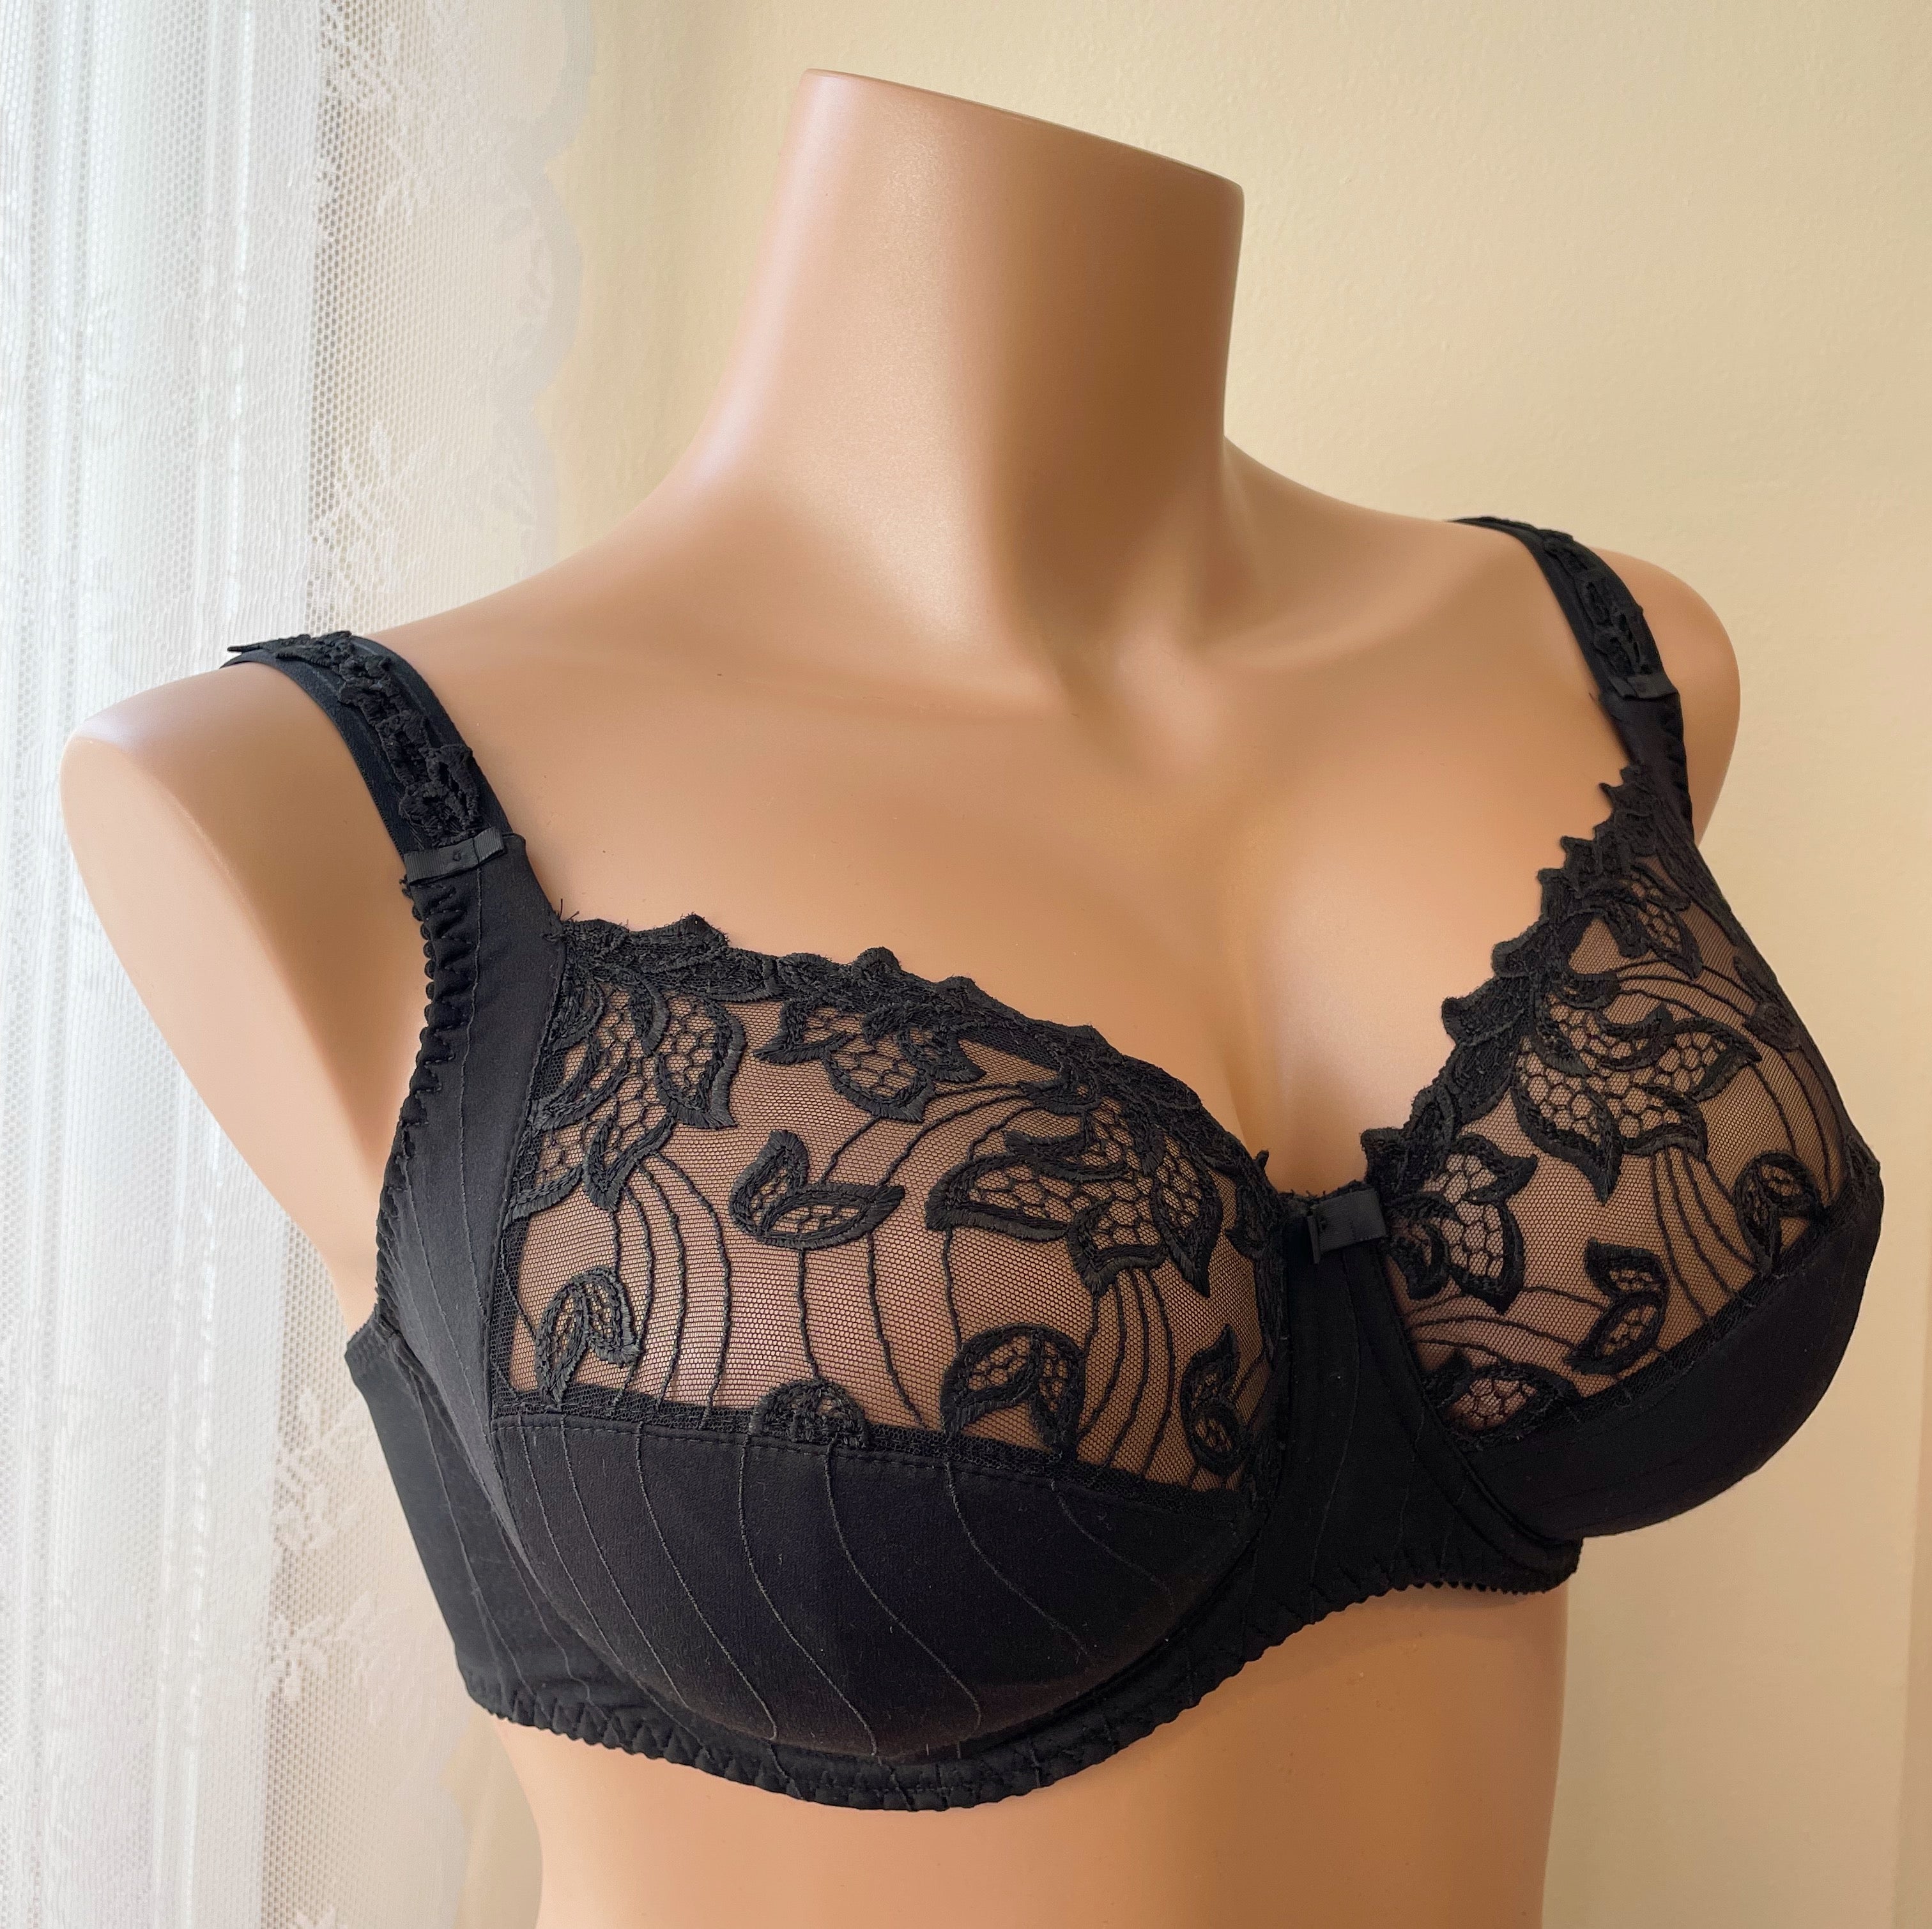 Three-piece bra with a legendary fit and an elegant, airy look. With subtly shimmery embroidery on the cups and straps. The sturdy cups and side panels lift and center the breasts. The raised side panels also offer more coverage and support. The cups are deeper than other PrimaDonna bras, providing even better lift for larger breasts. This bra creates a smooth, round silhouette for larger breasts up to a K cup.